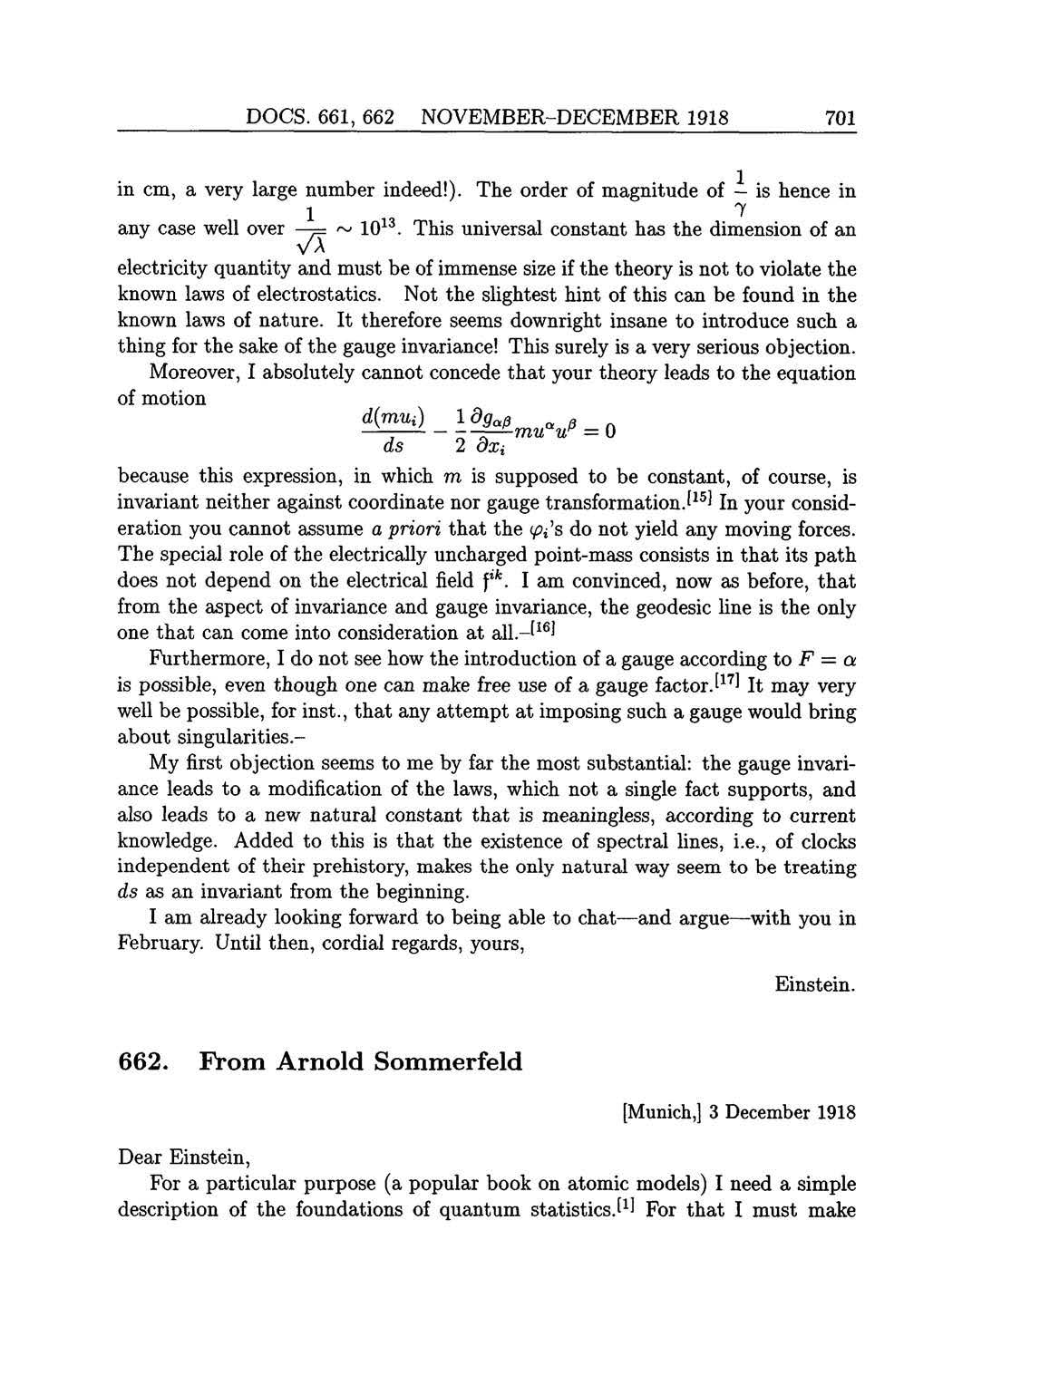 Volume 8: The Berlin Years: Correspondence, 1914-1918 (English translation supplement) page 701